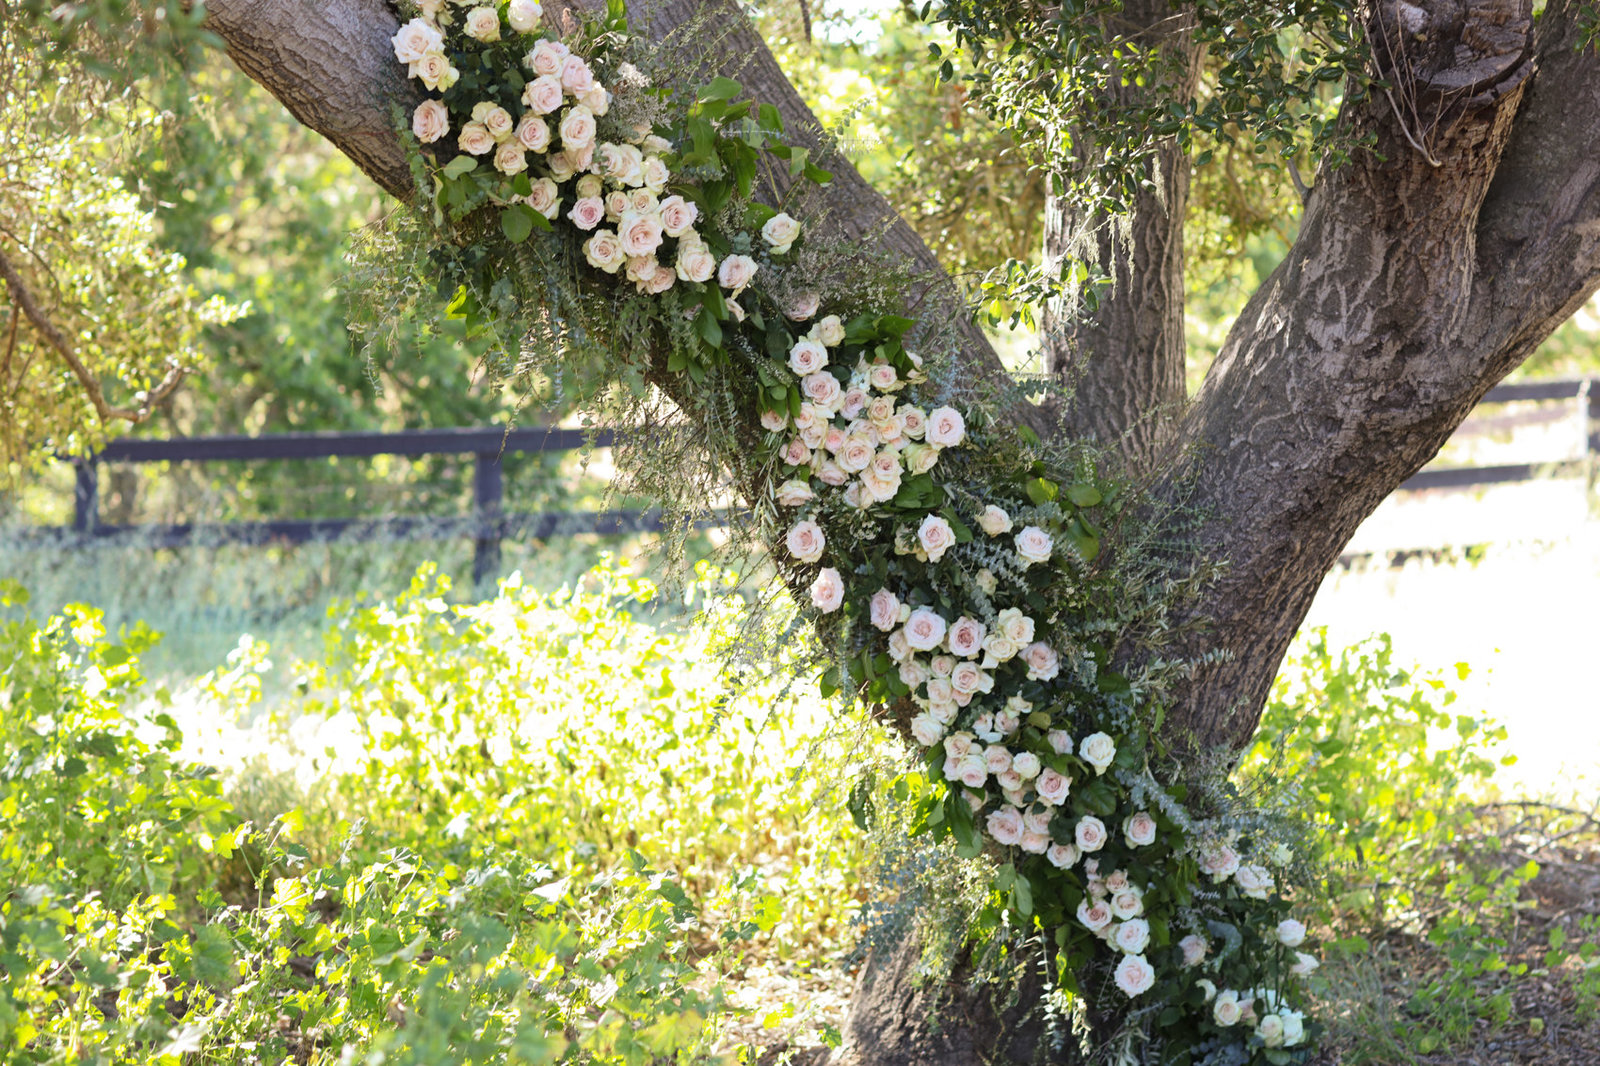 Northern california wedding has stunning floral decorations at venue